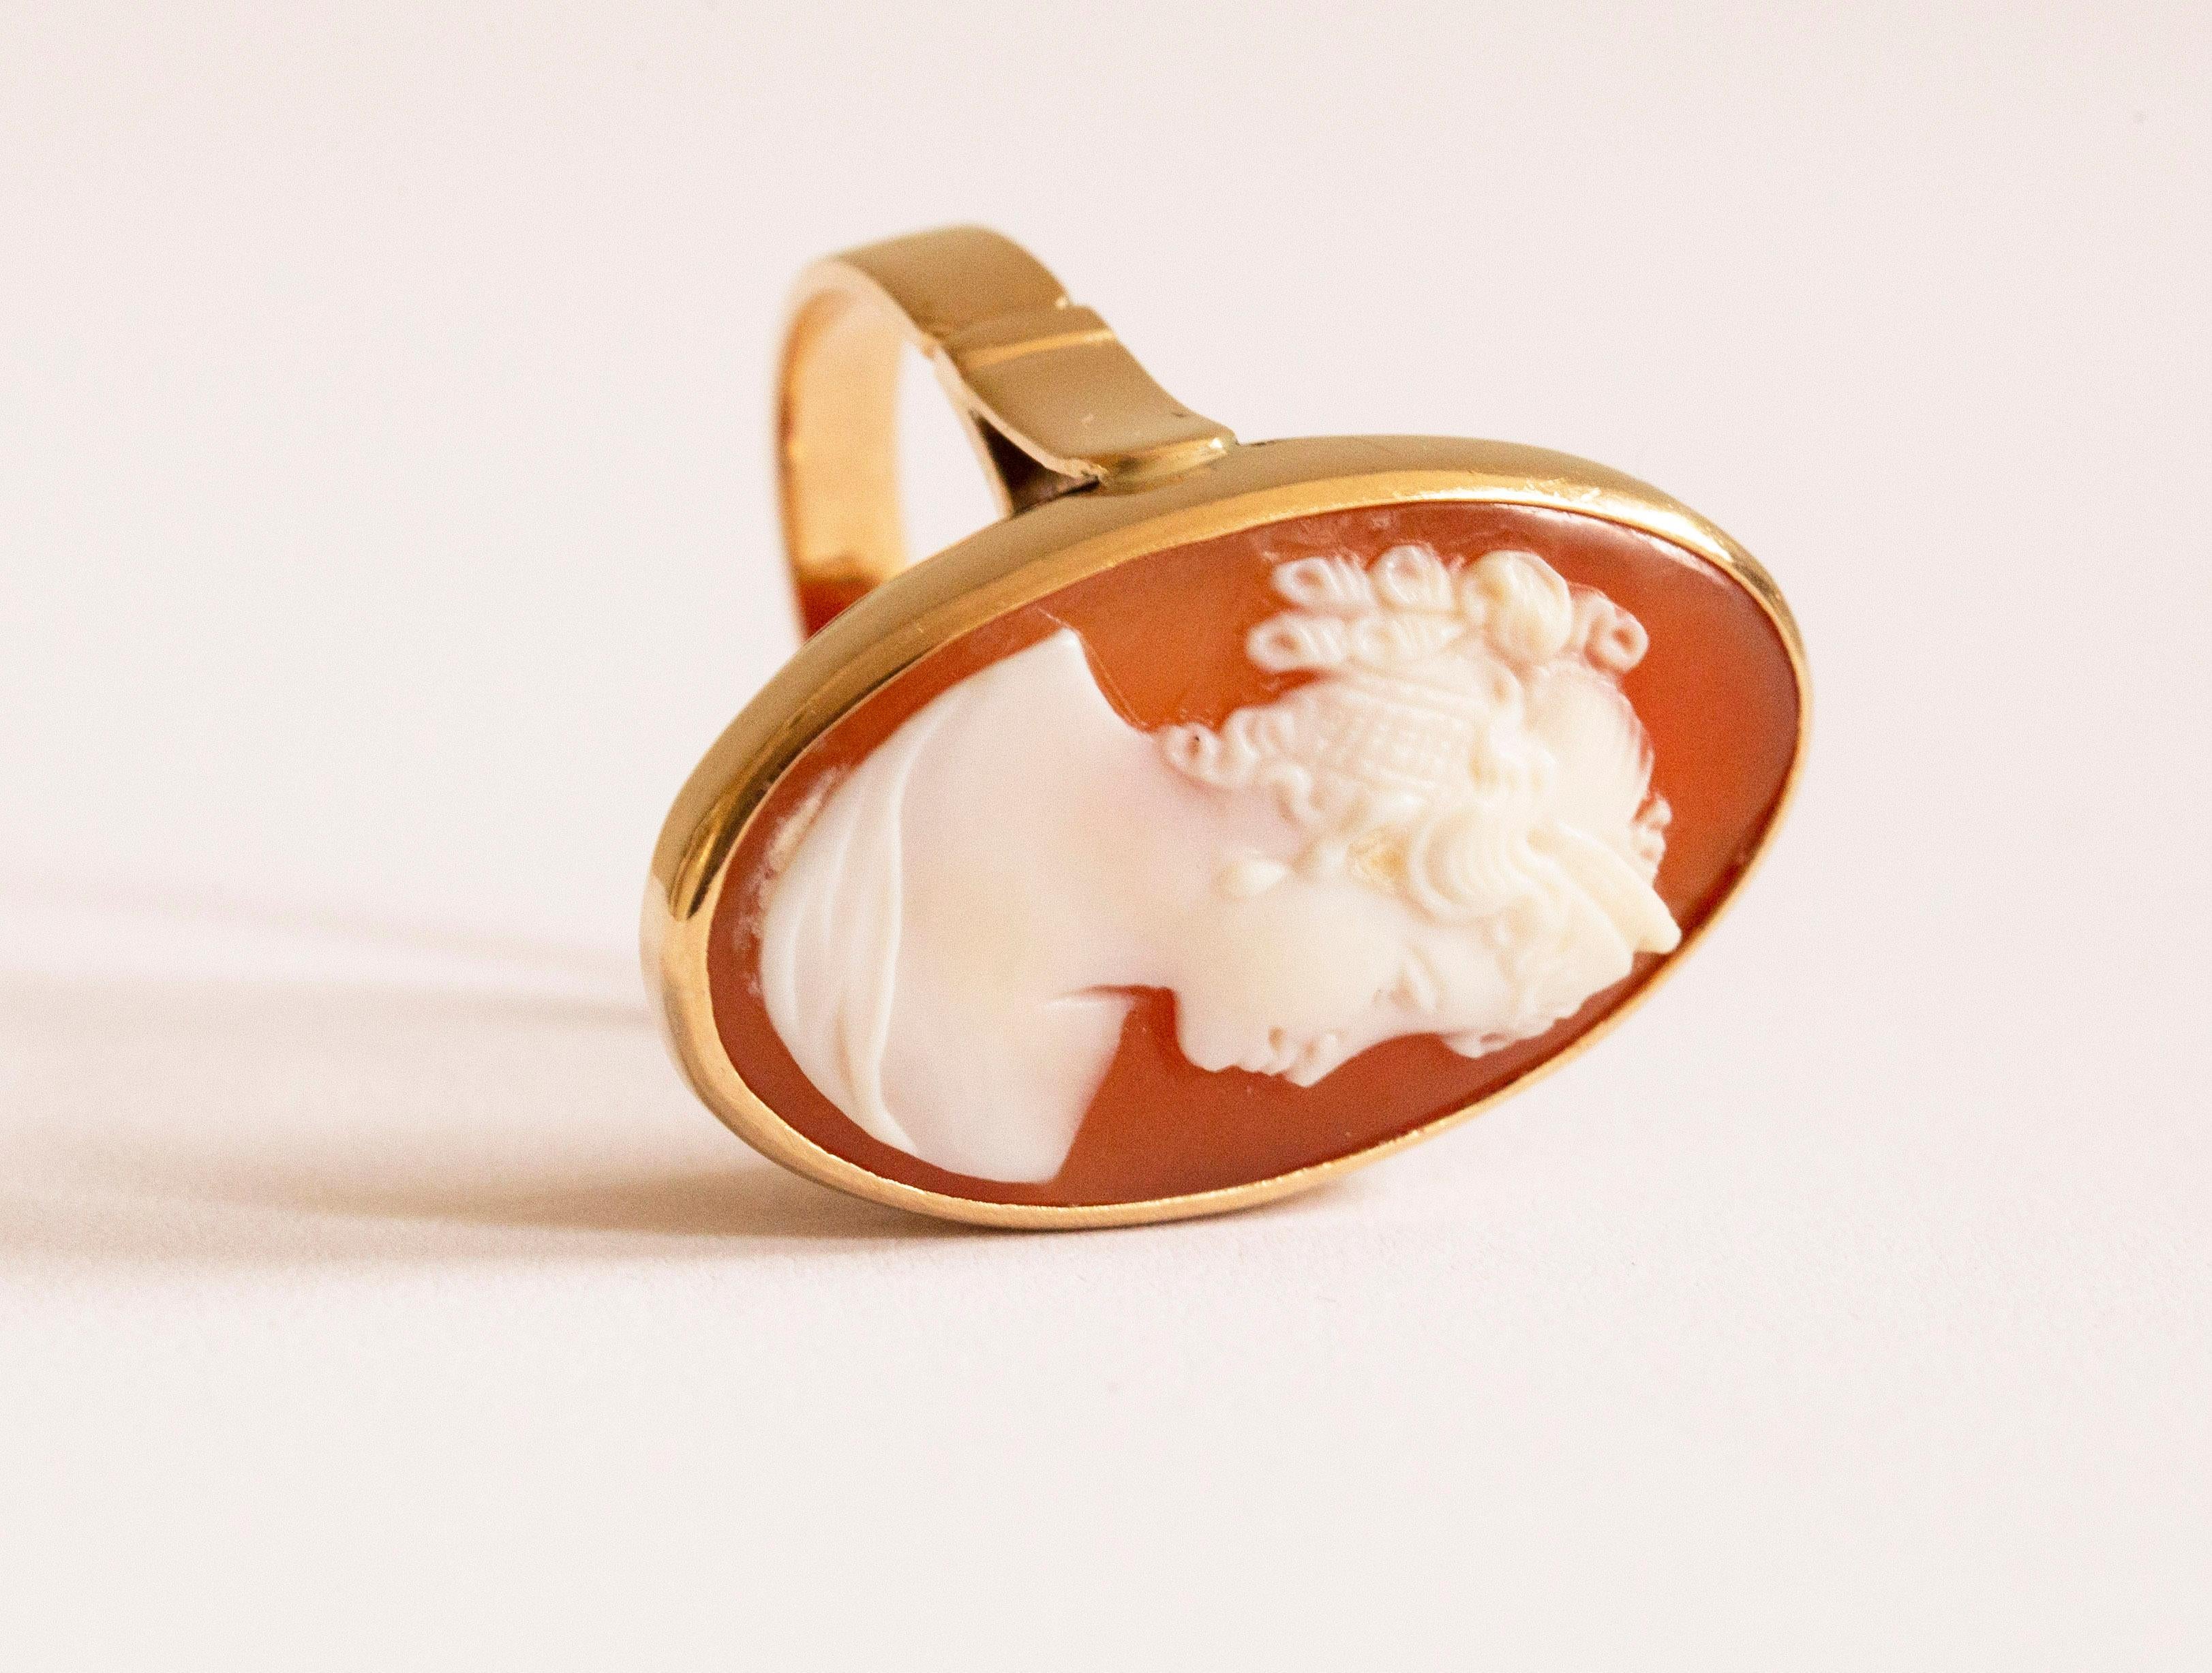 carved shell ring